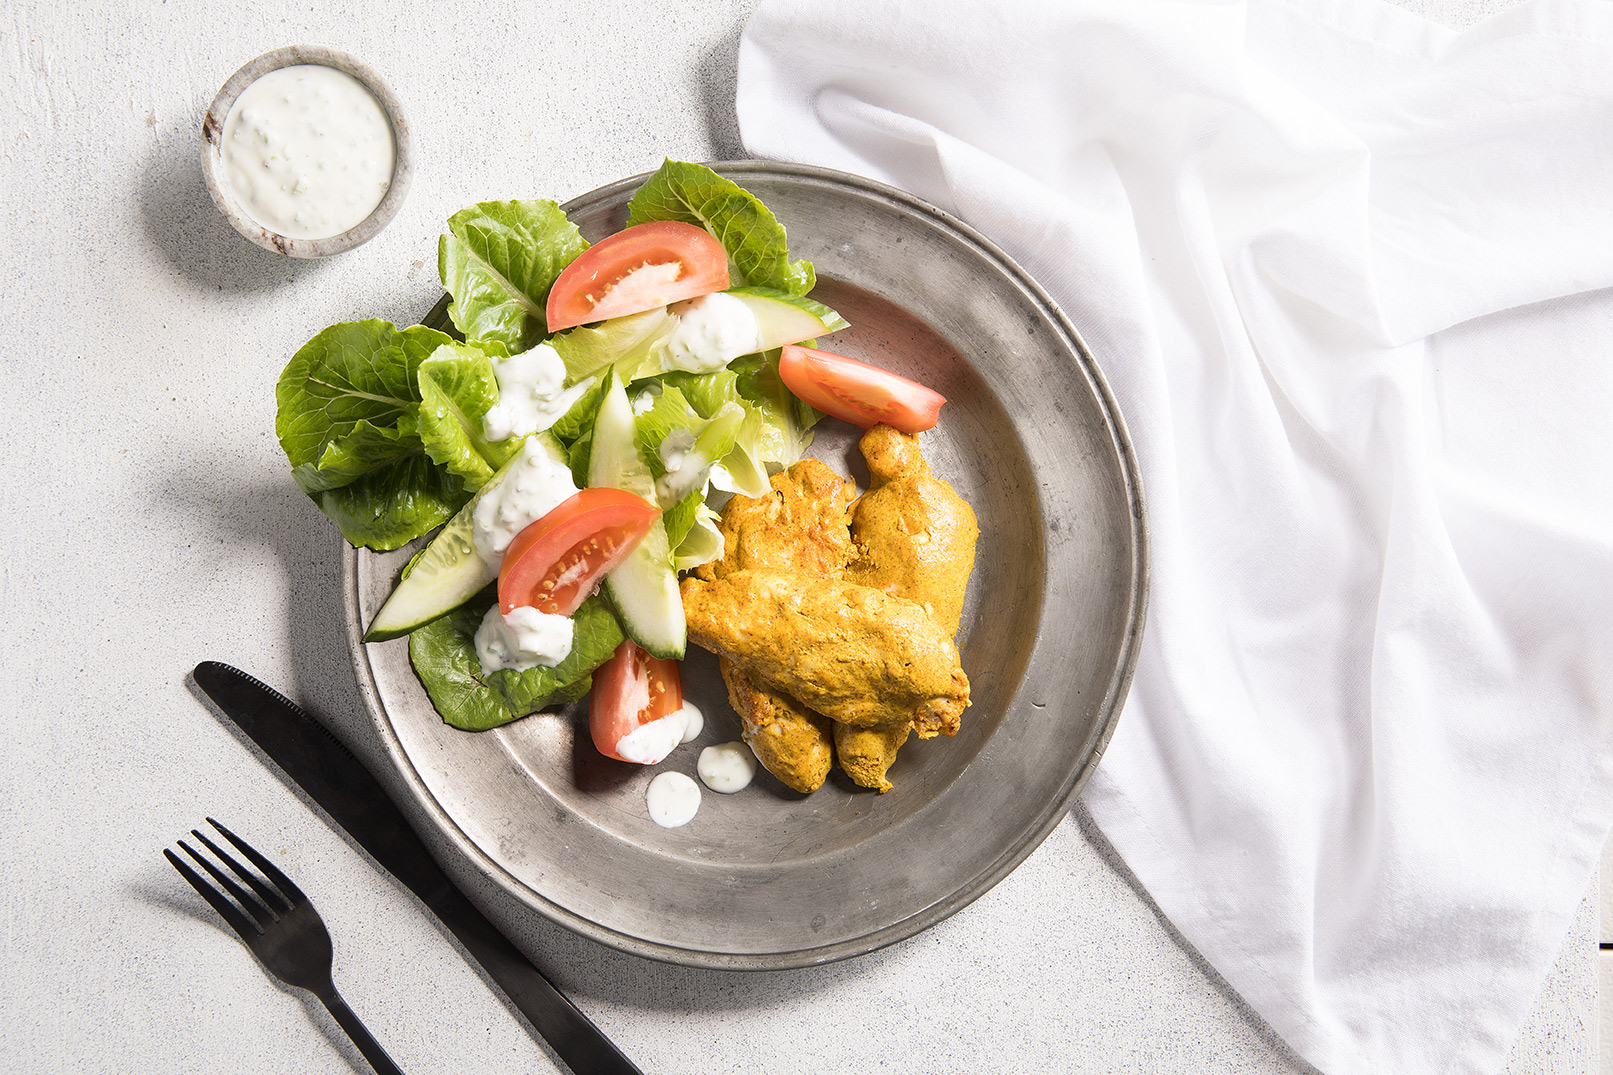 Image of tandoori chicken with salad on a silver bowl with a side of dressing, silver knife and fork and white cloth napkin.